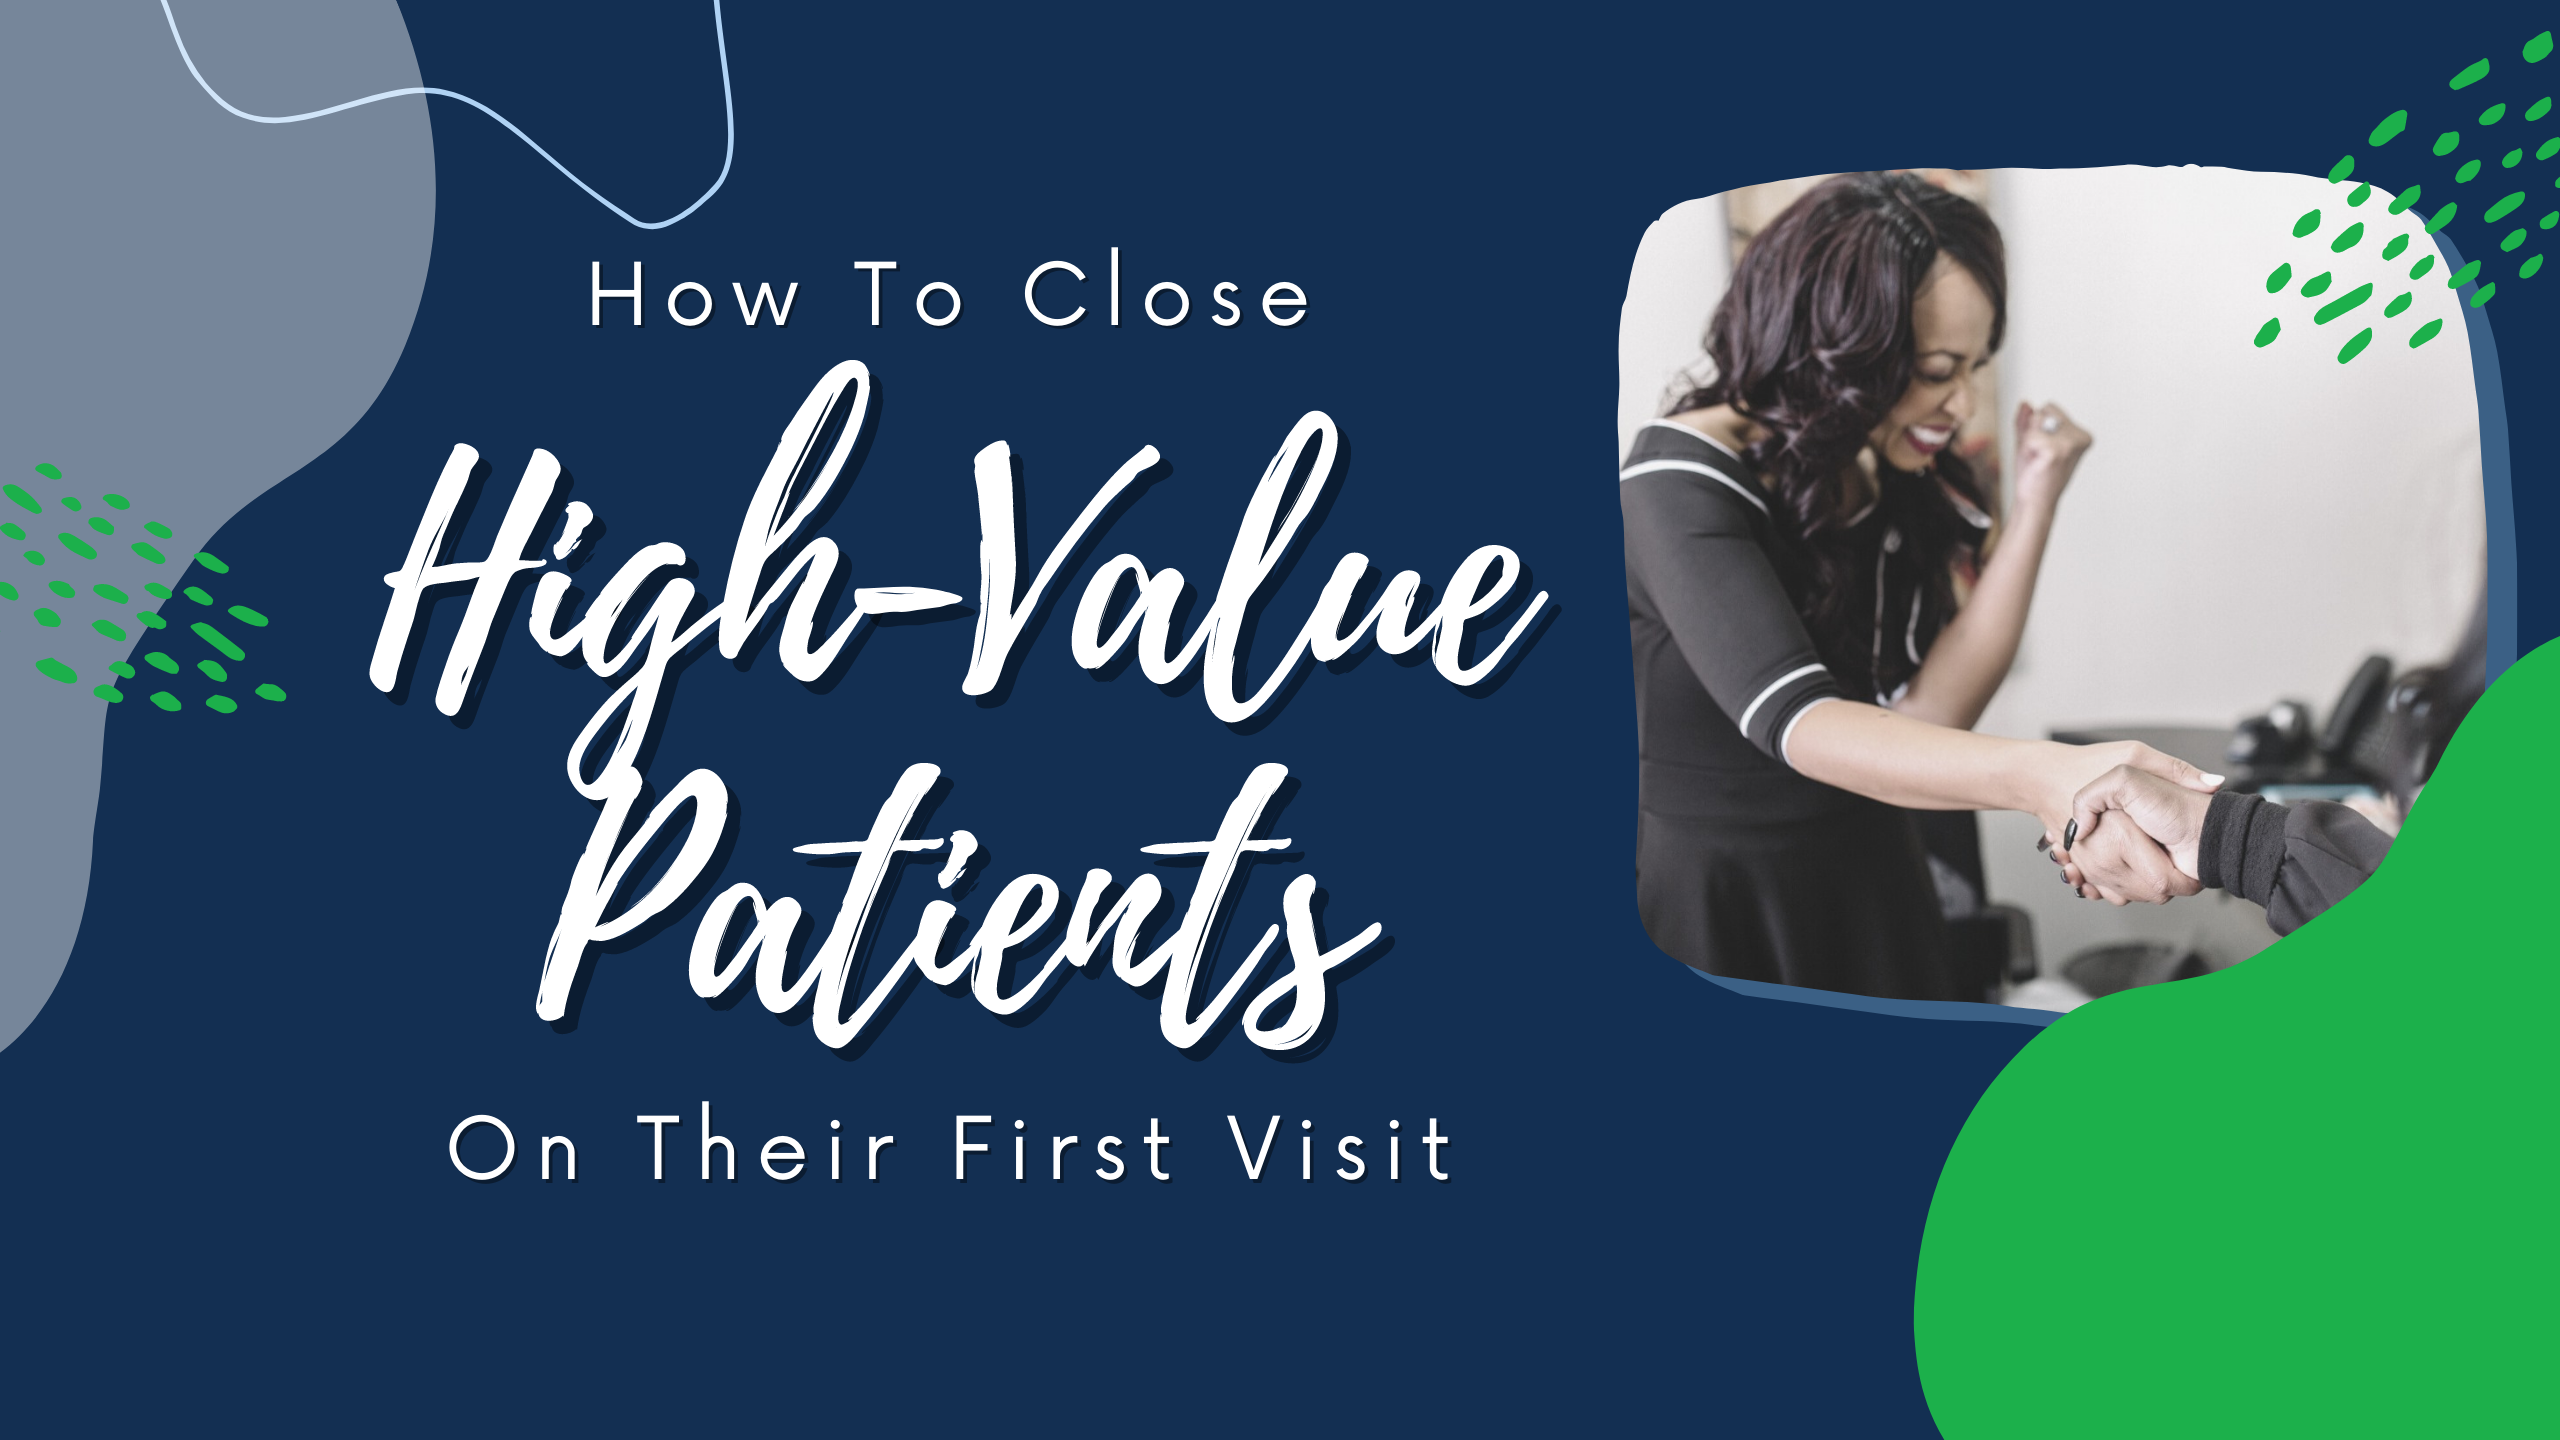 How To Close High-Value Patients On Their First Visit